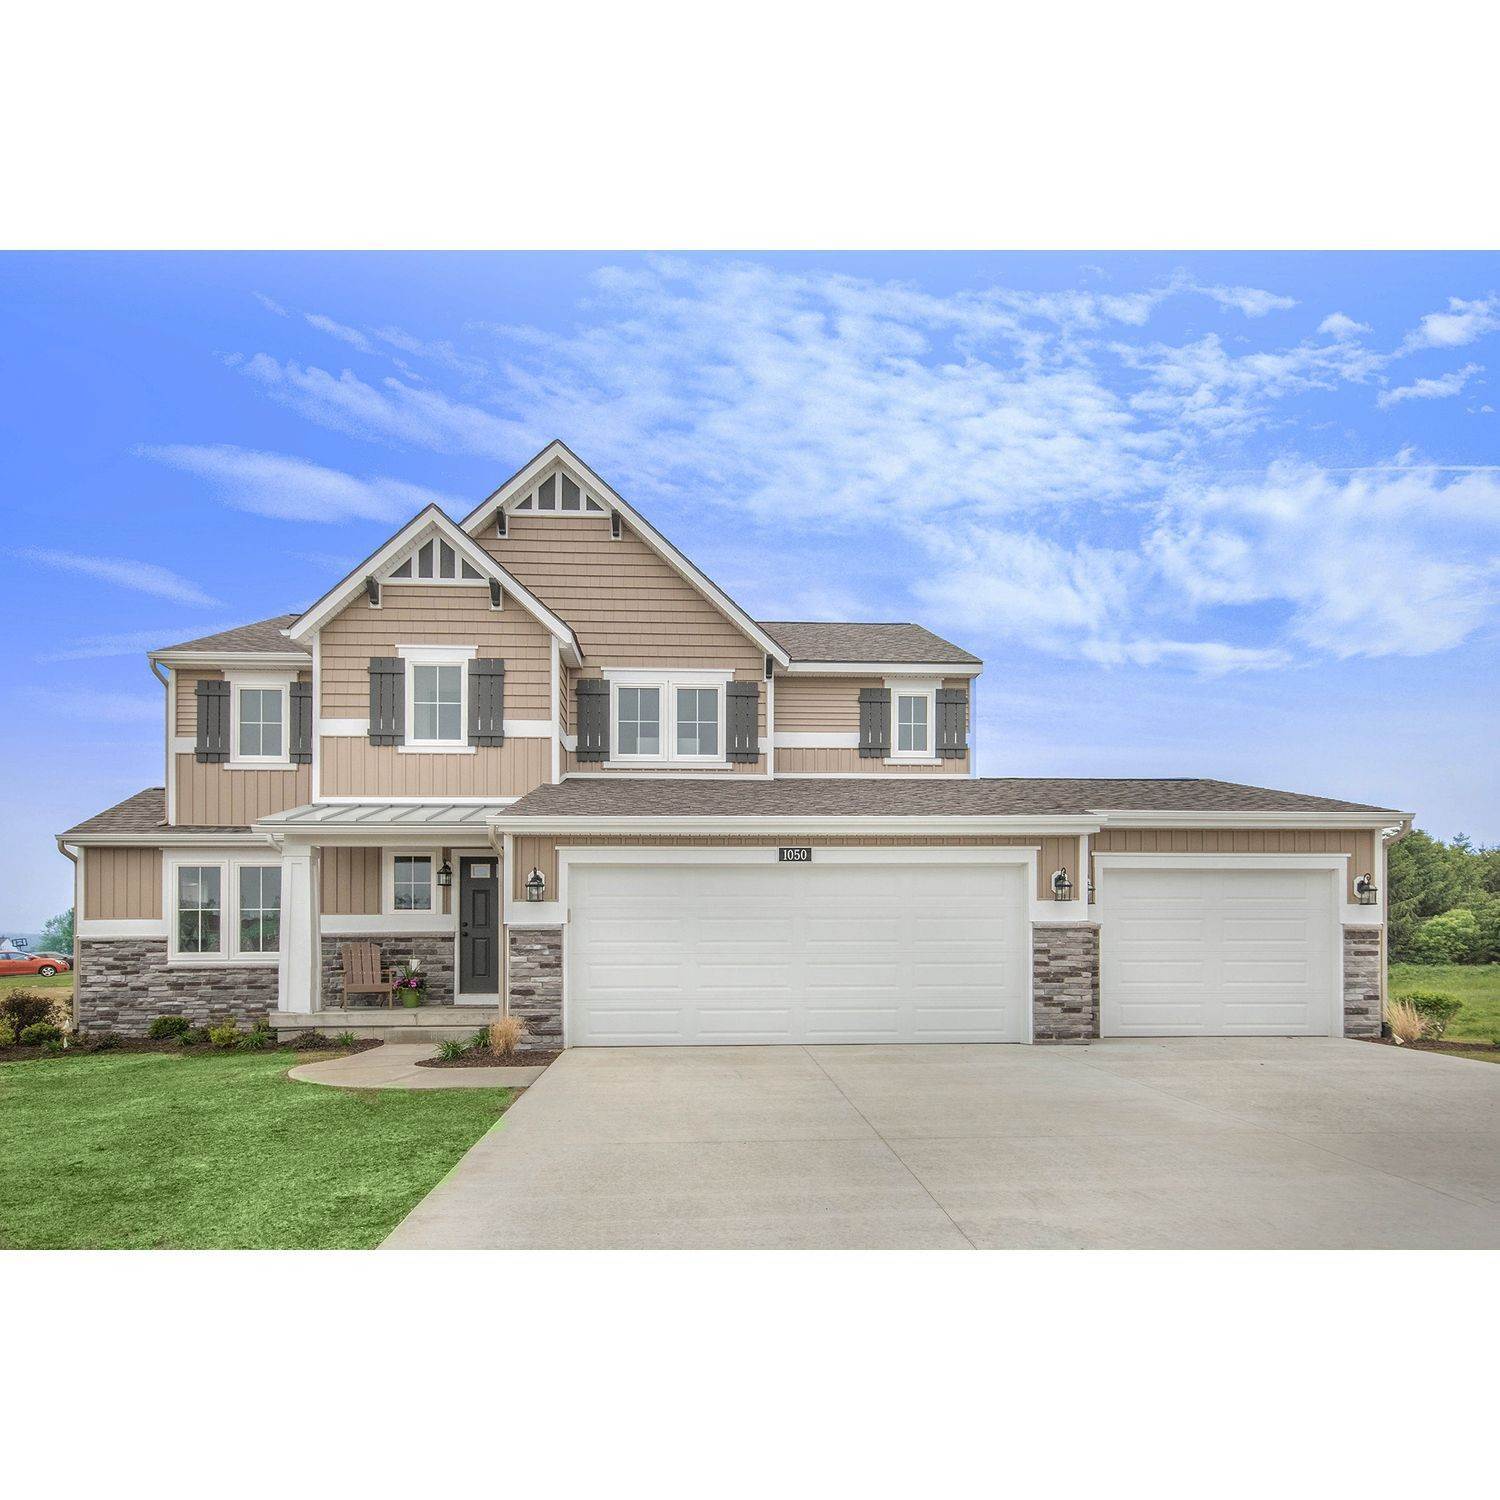 Single Family for Sale at Grand Haven, MI 49417